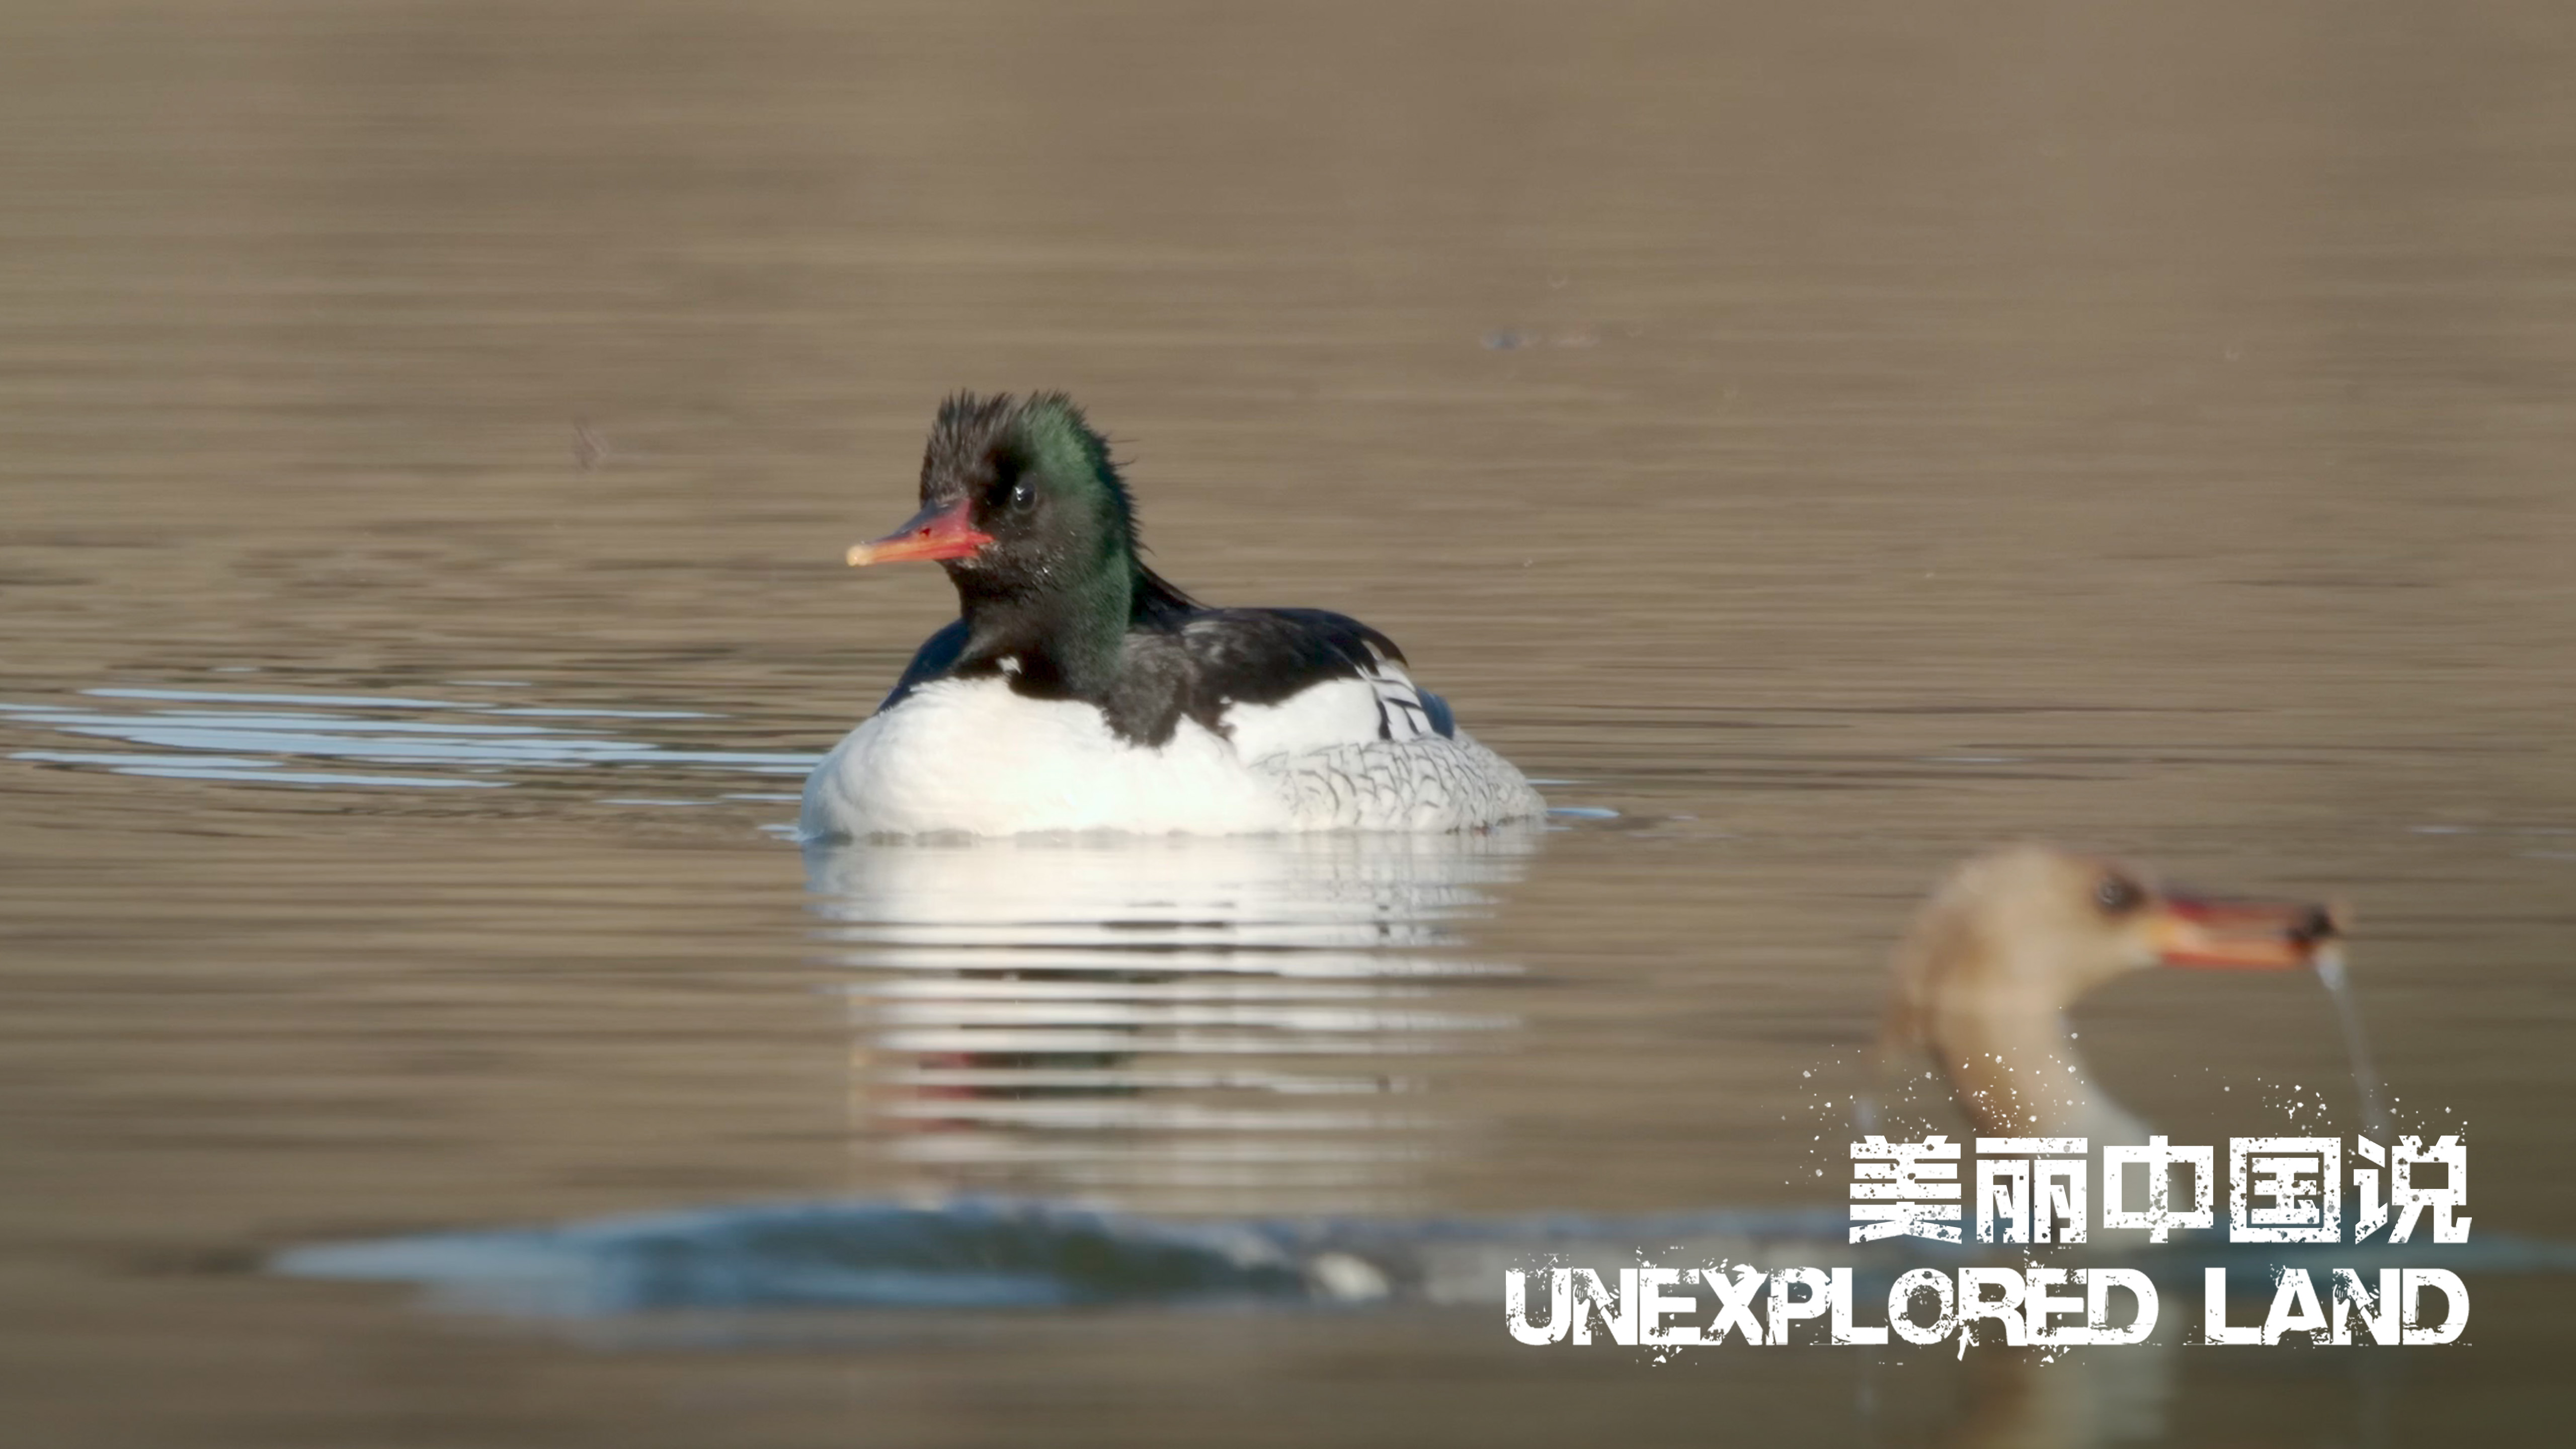 Unexplored Land: Get to know the duck with a 'fashionable hairstyle'